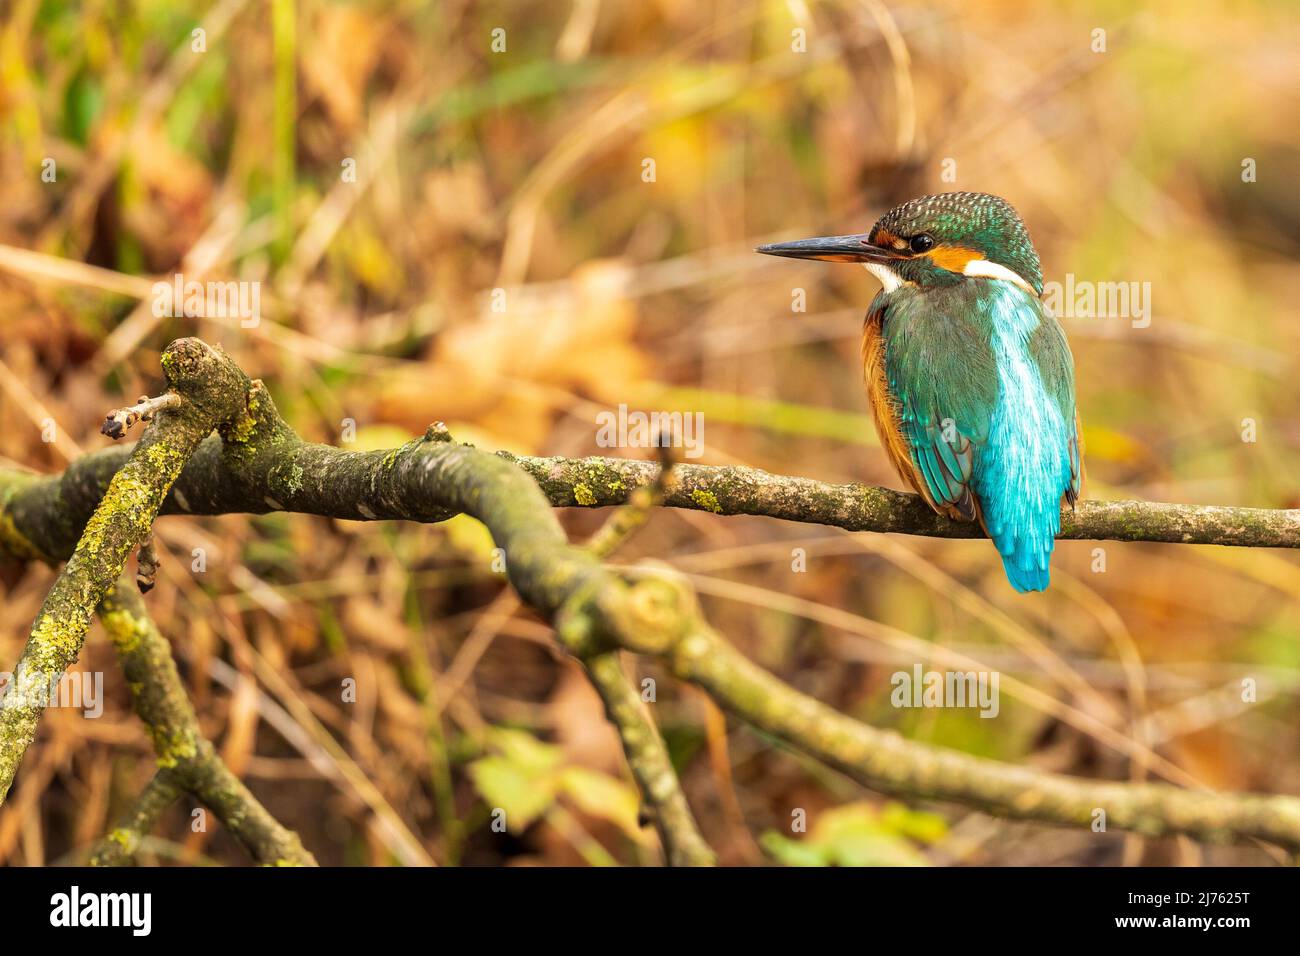 A male kingfisher on his perch Stock Photo